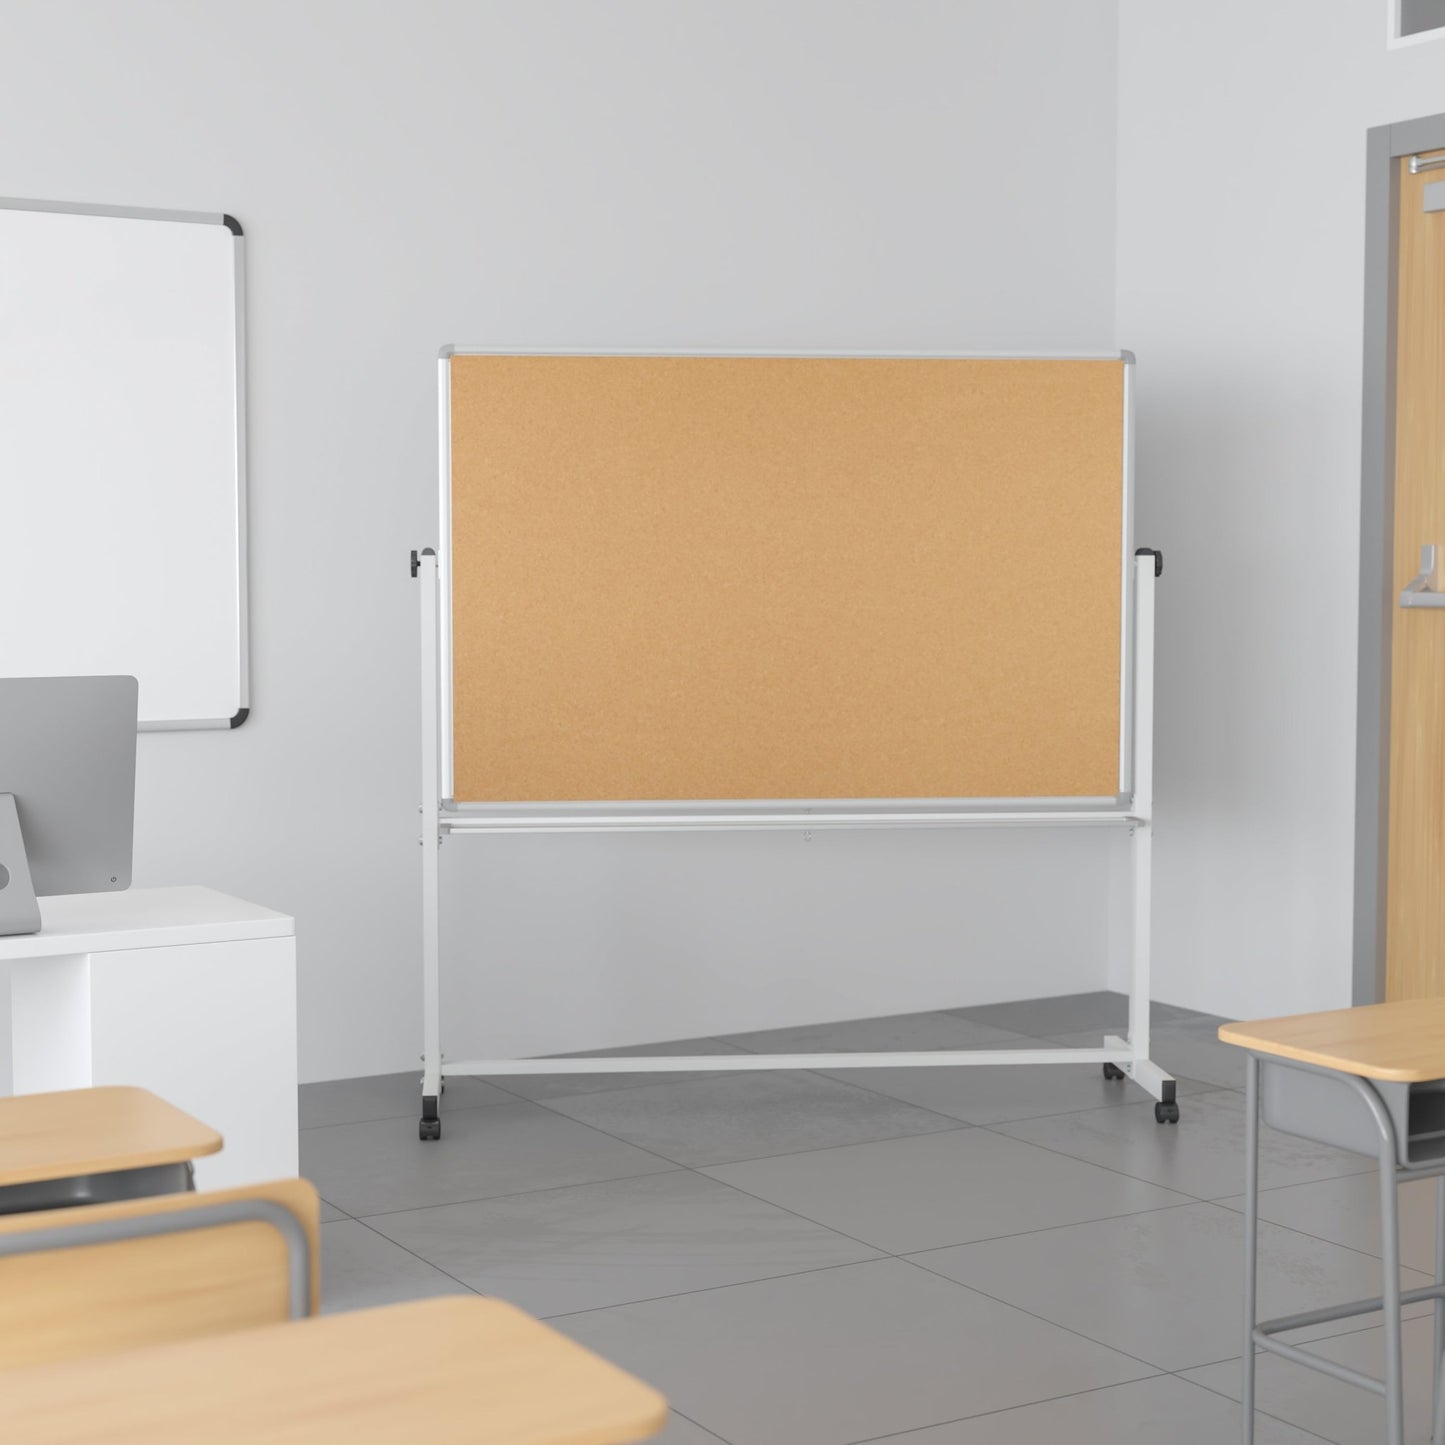 HERCULES Series 64.25"W x 64.75"H Reversible Mobile Cork Bulletin Board and White Board with Pen Tray - SchoolOutlet